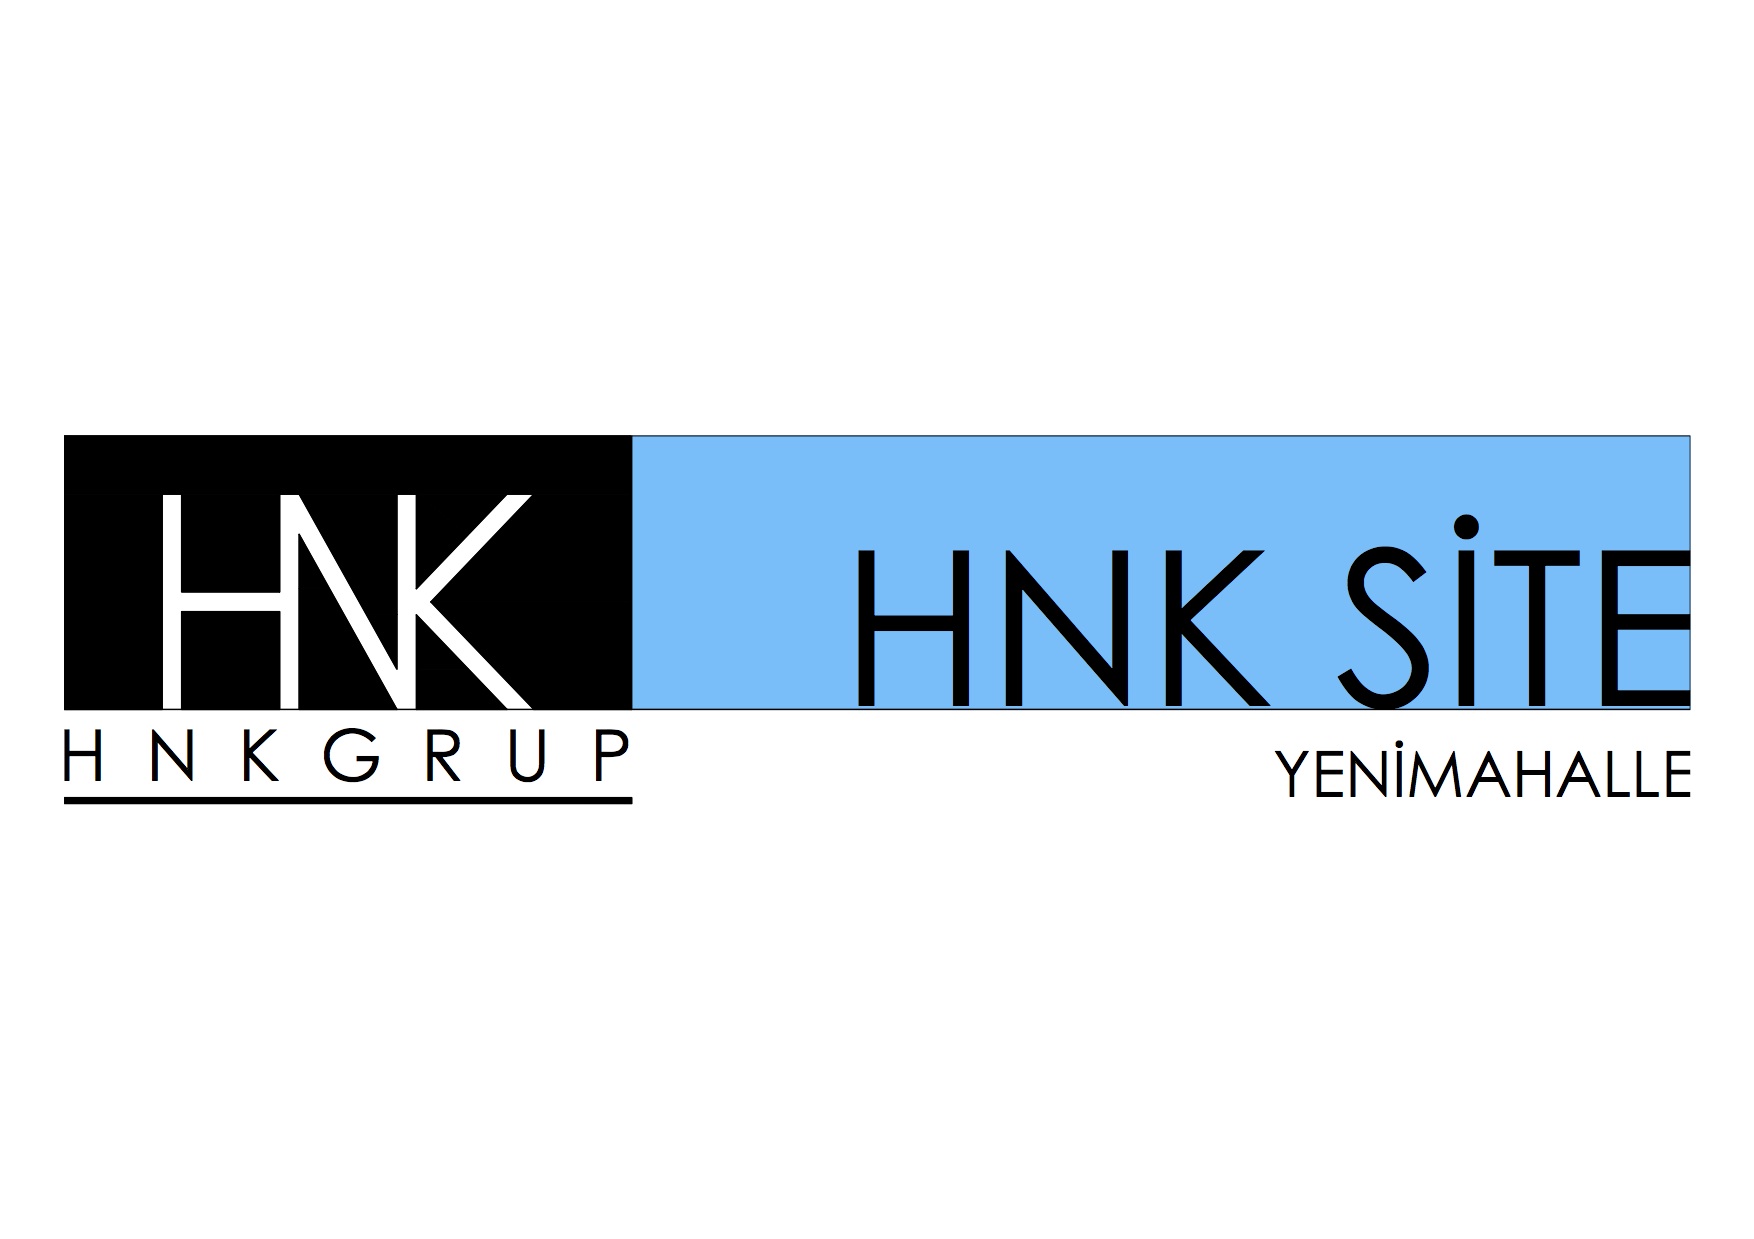 HNK SİTE